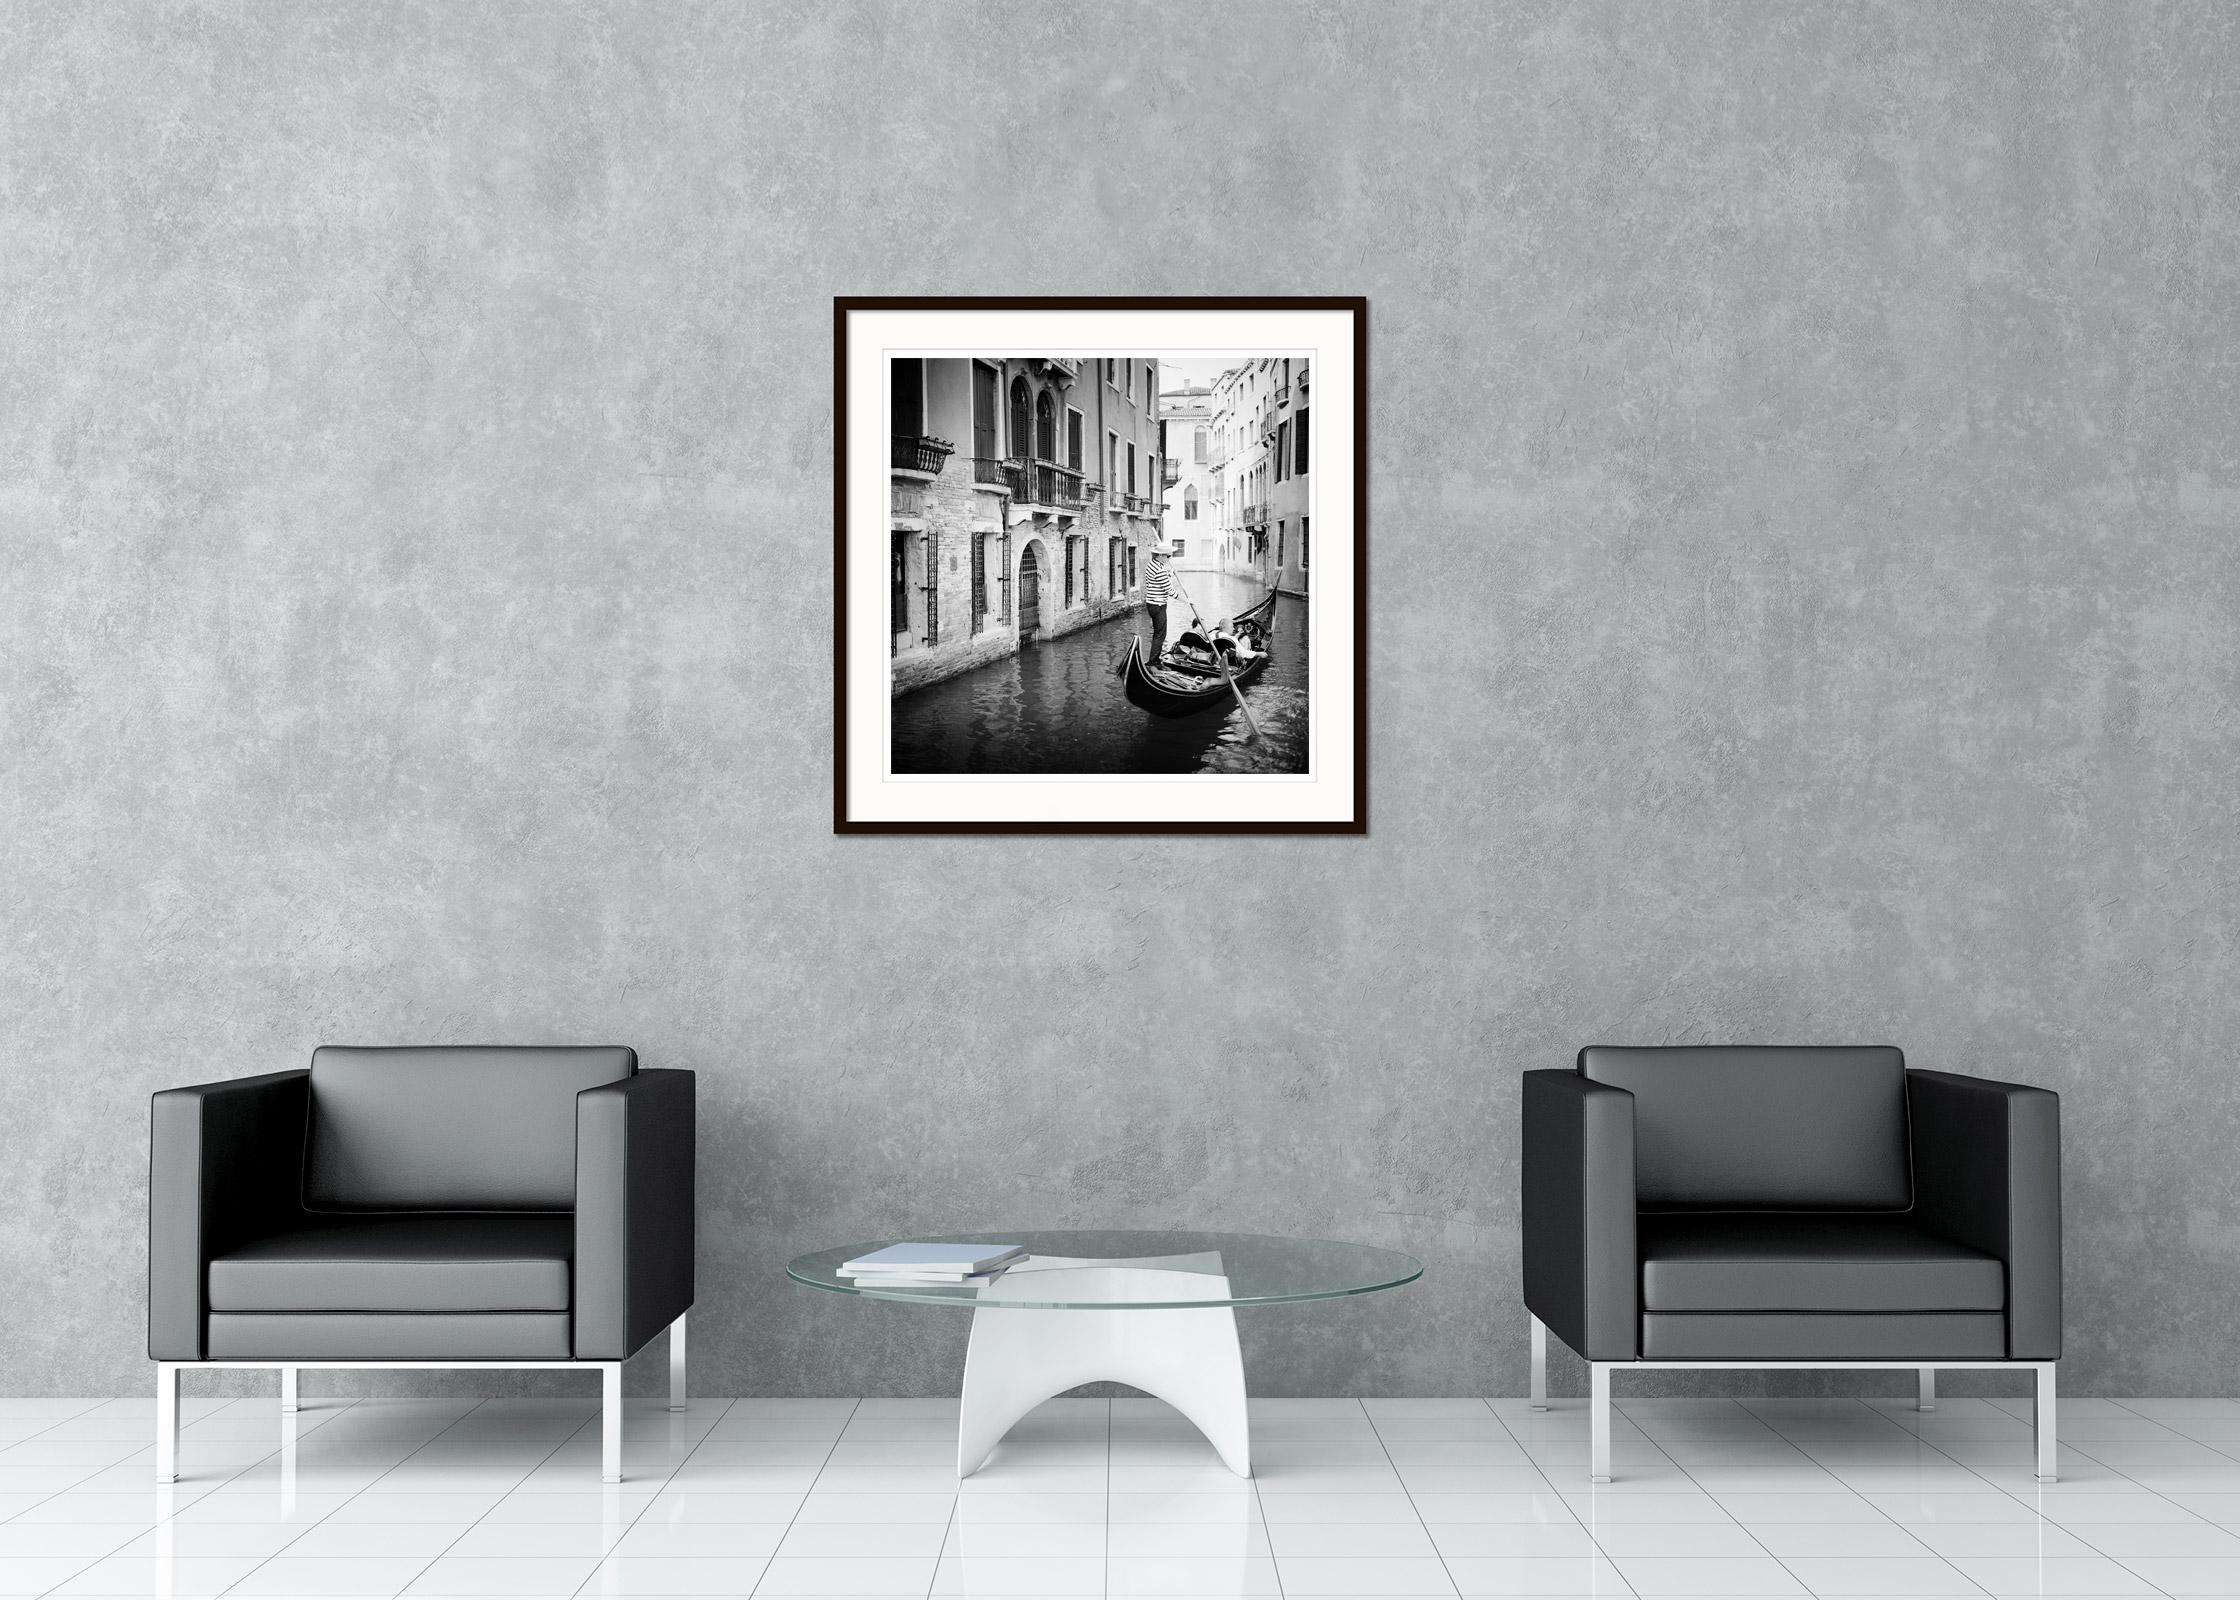 Black and White Fine Art landscape photography. Beautiful gondola in the romantic canals in the heart of Venice, Italy. Archival pigment ink print, edition of 9. Signed, titled, dated and numbered by artist. Certificate of authenticity included.